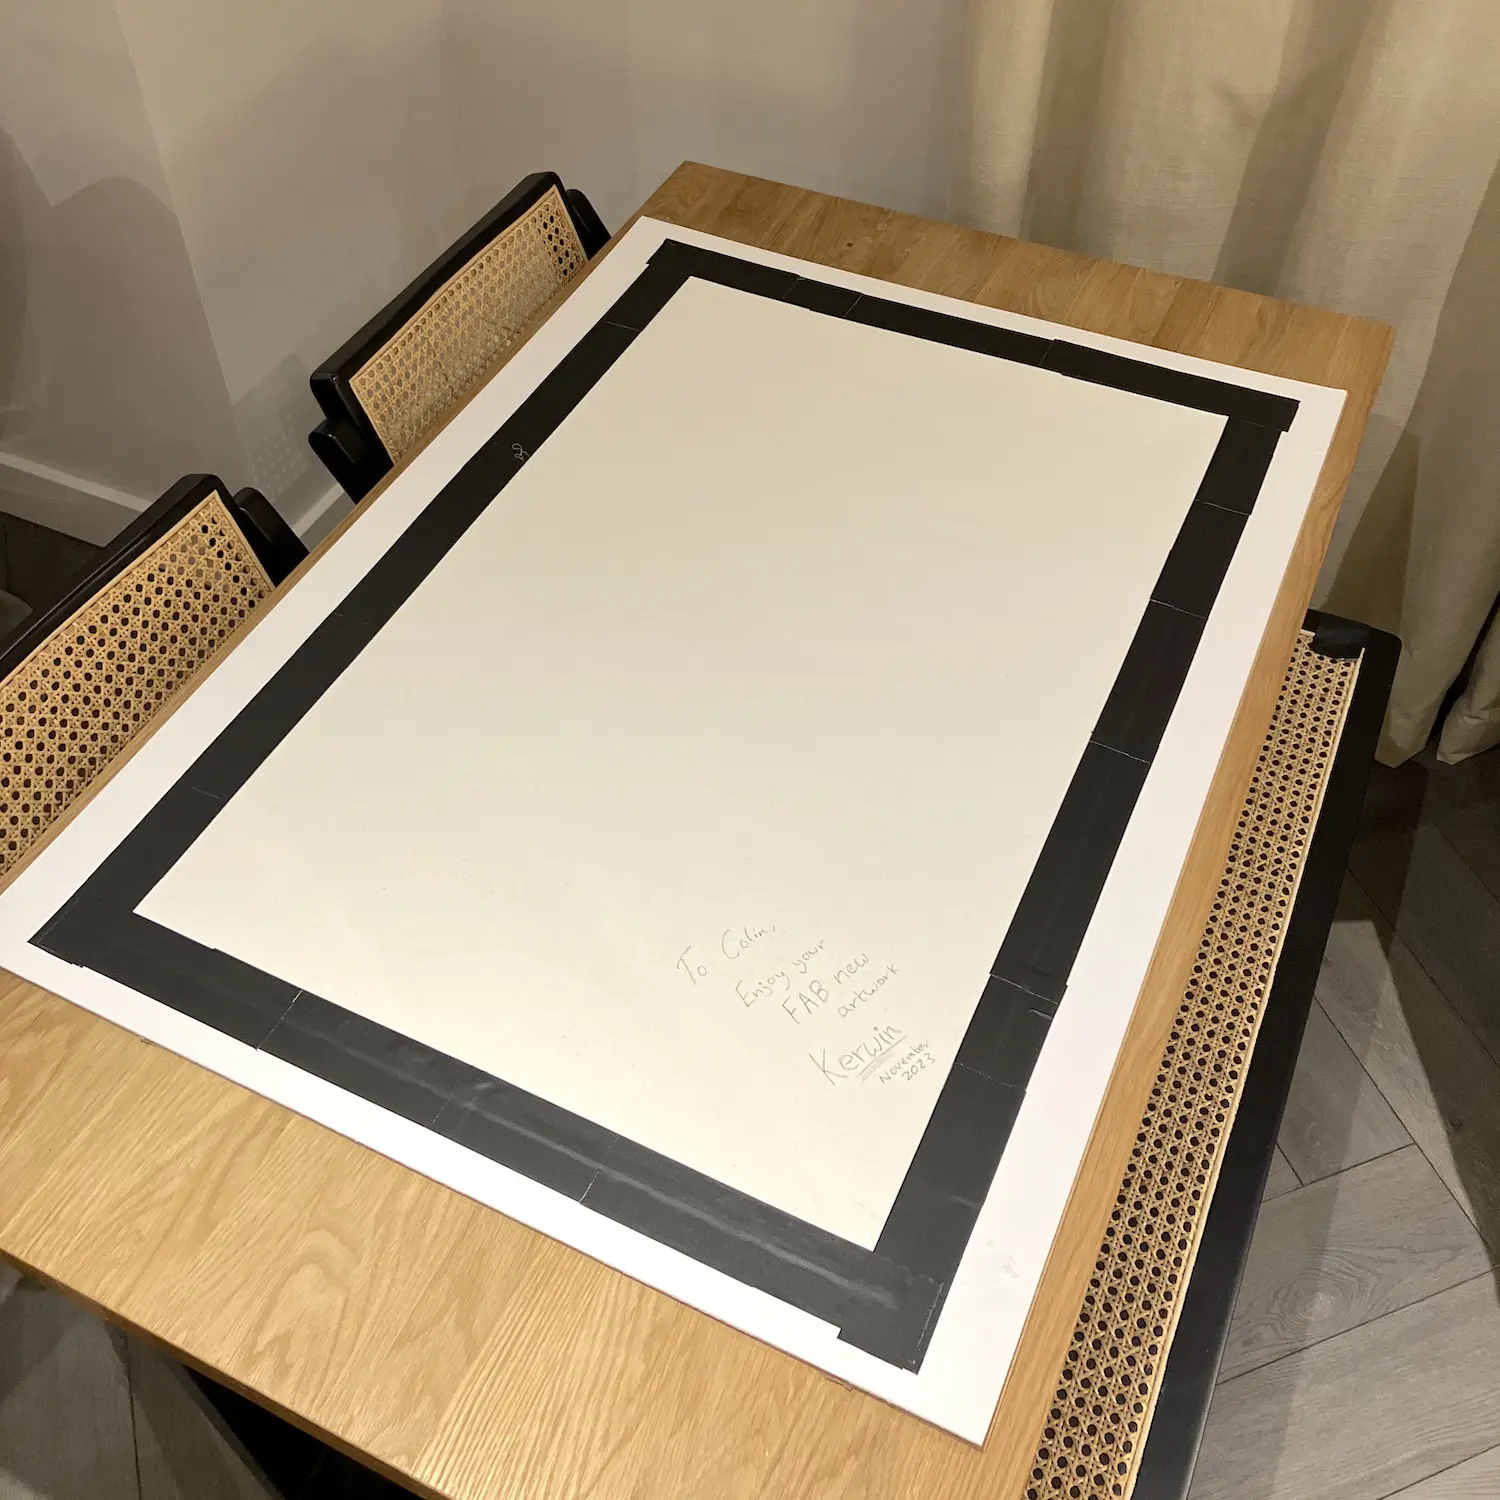 Framing your art using a mount